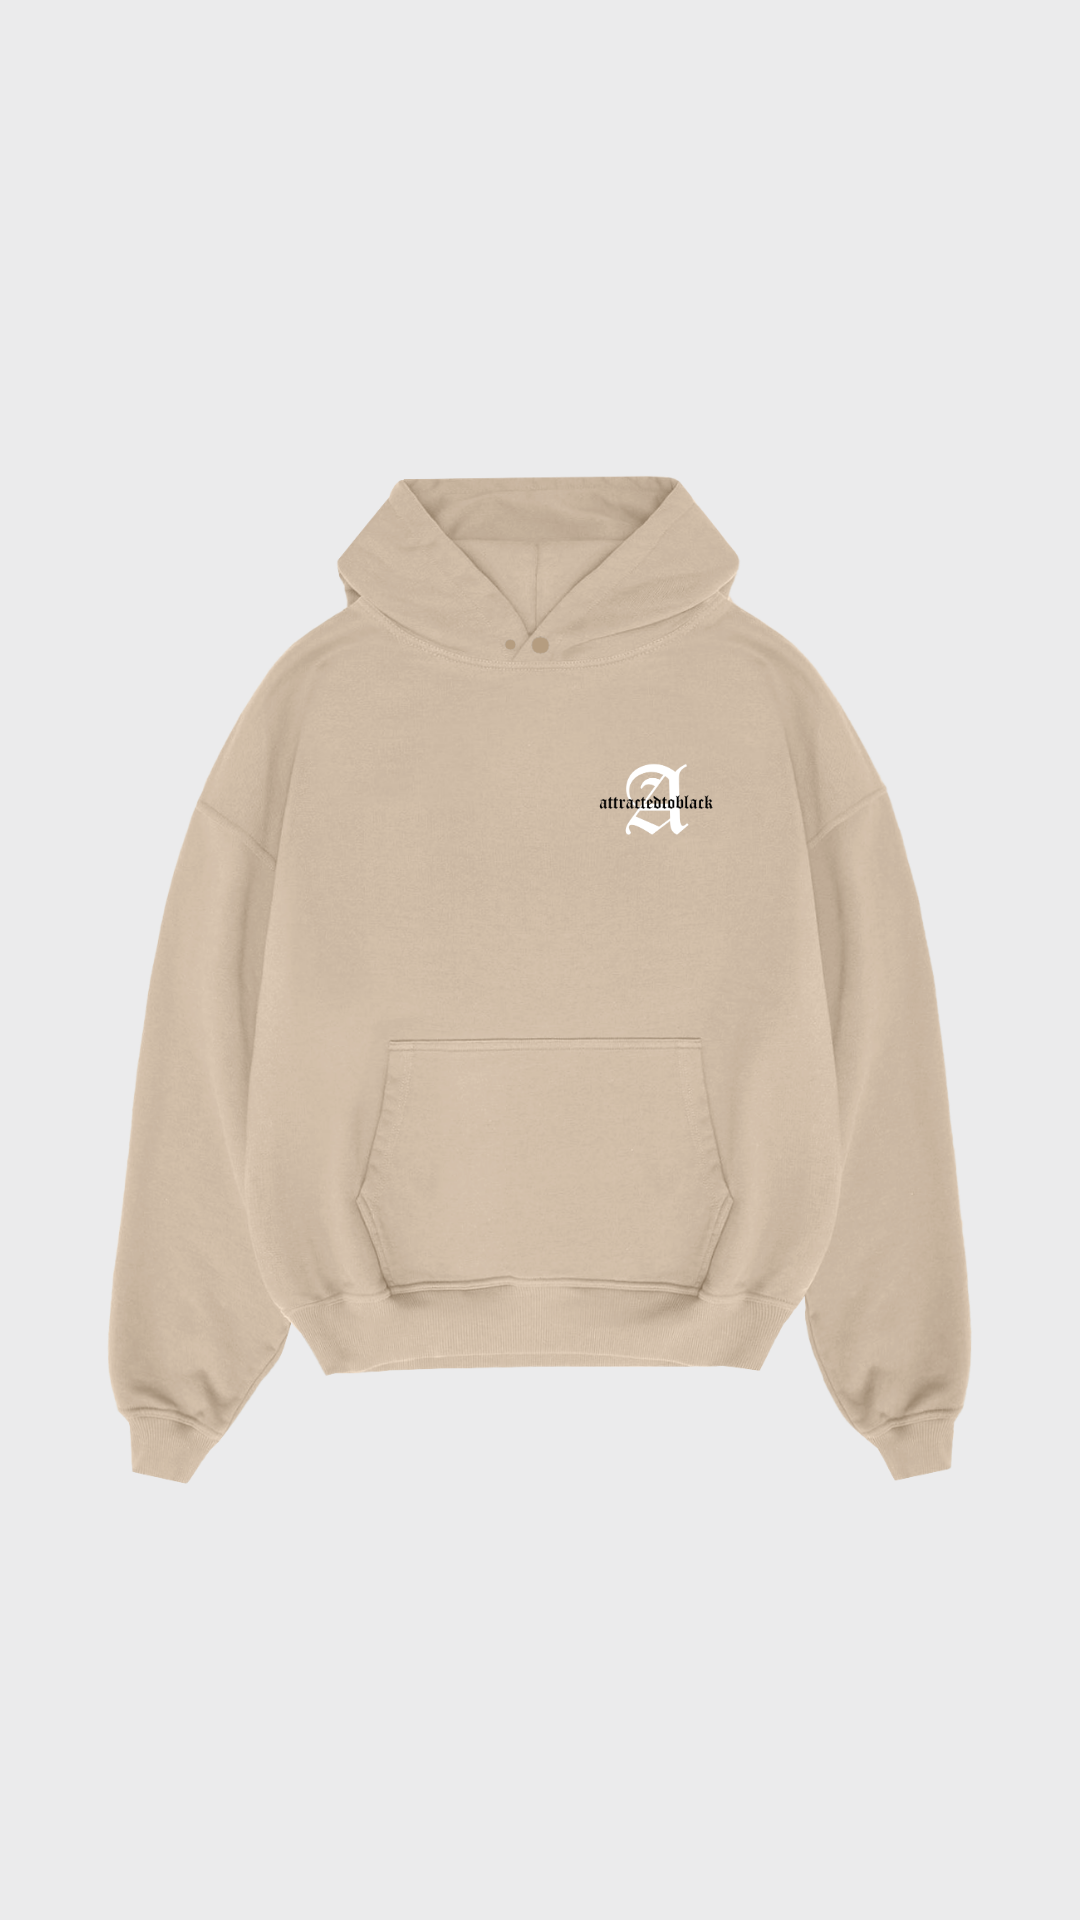 The Relatives Hoodie